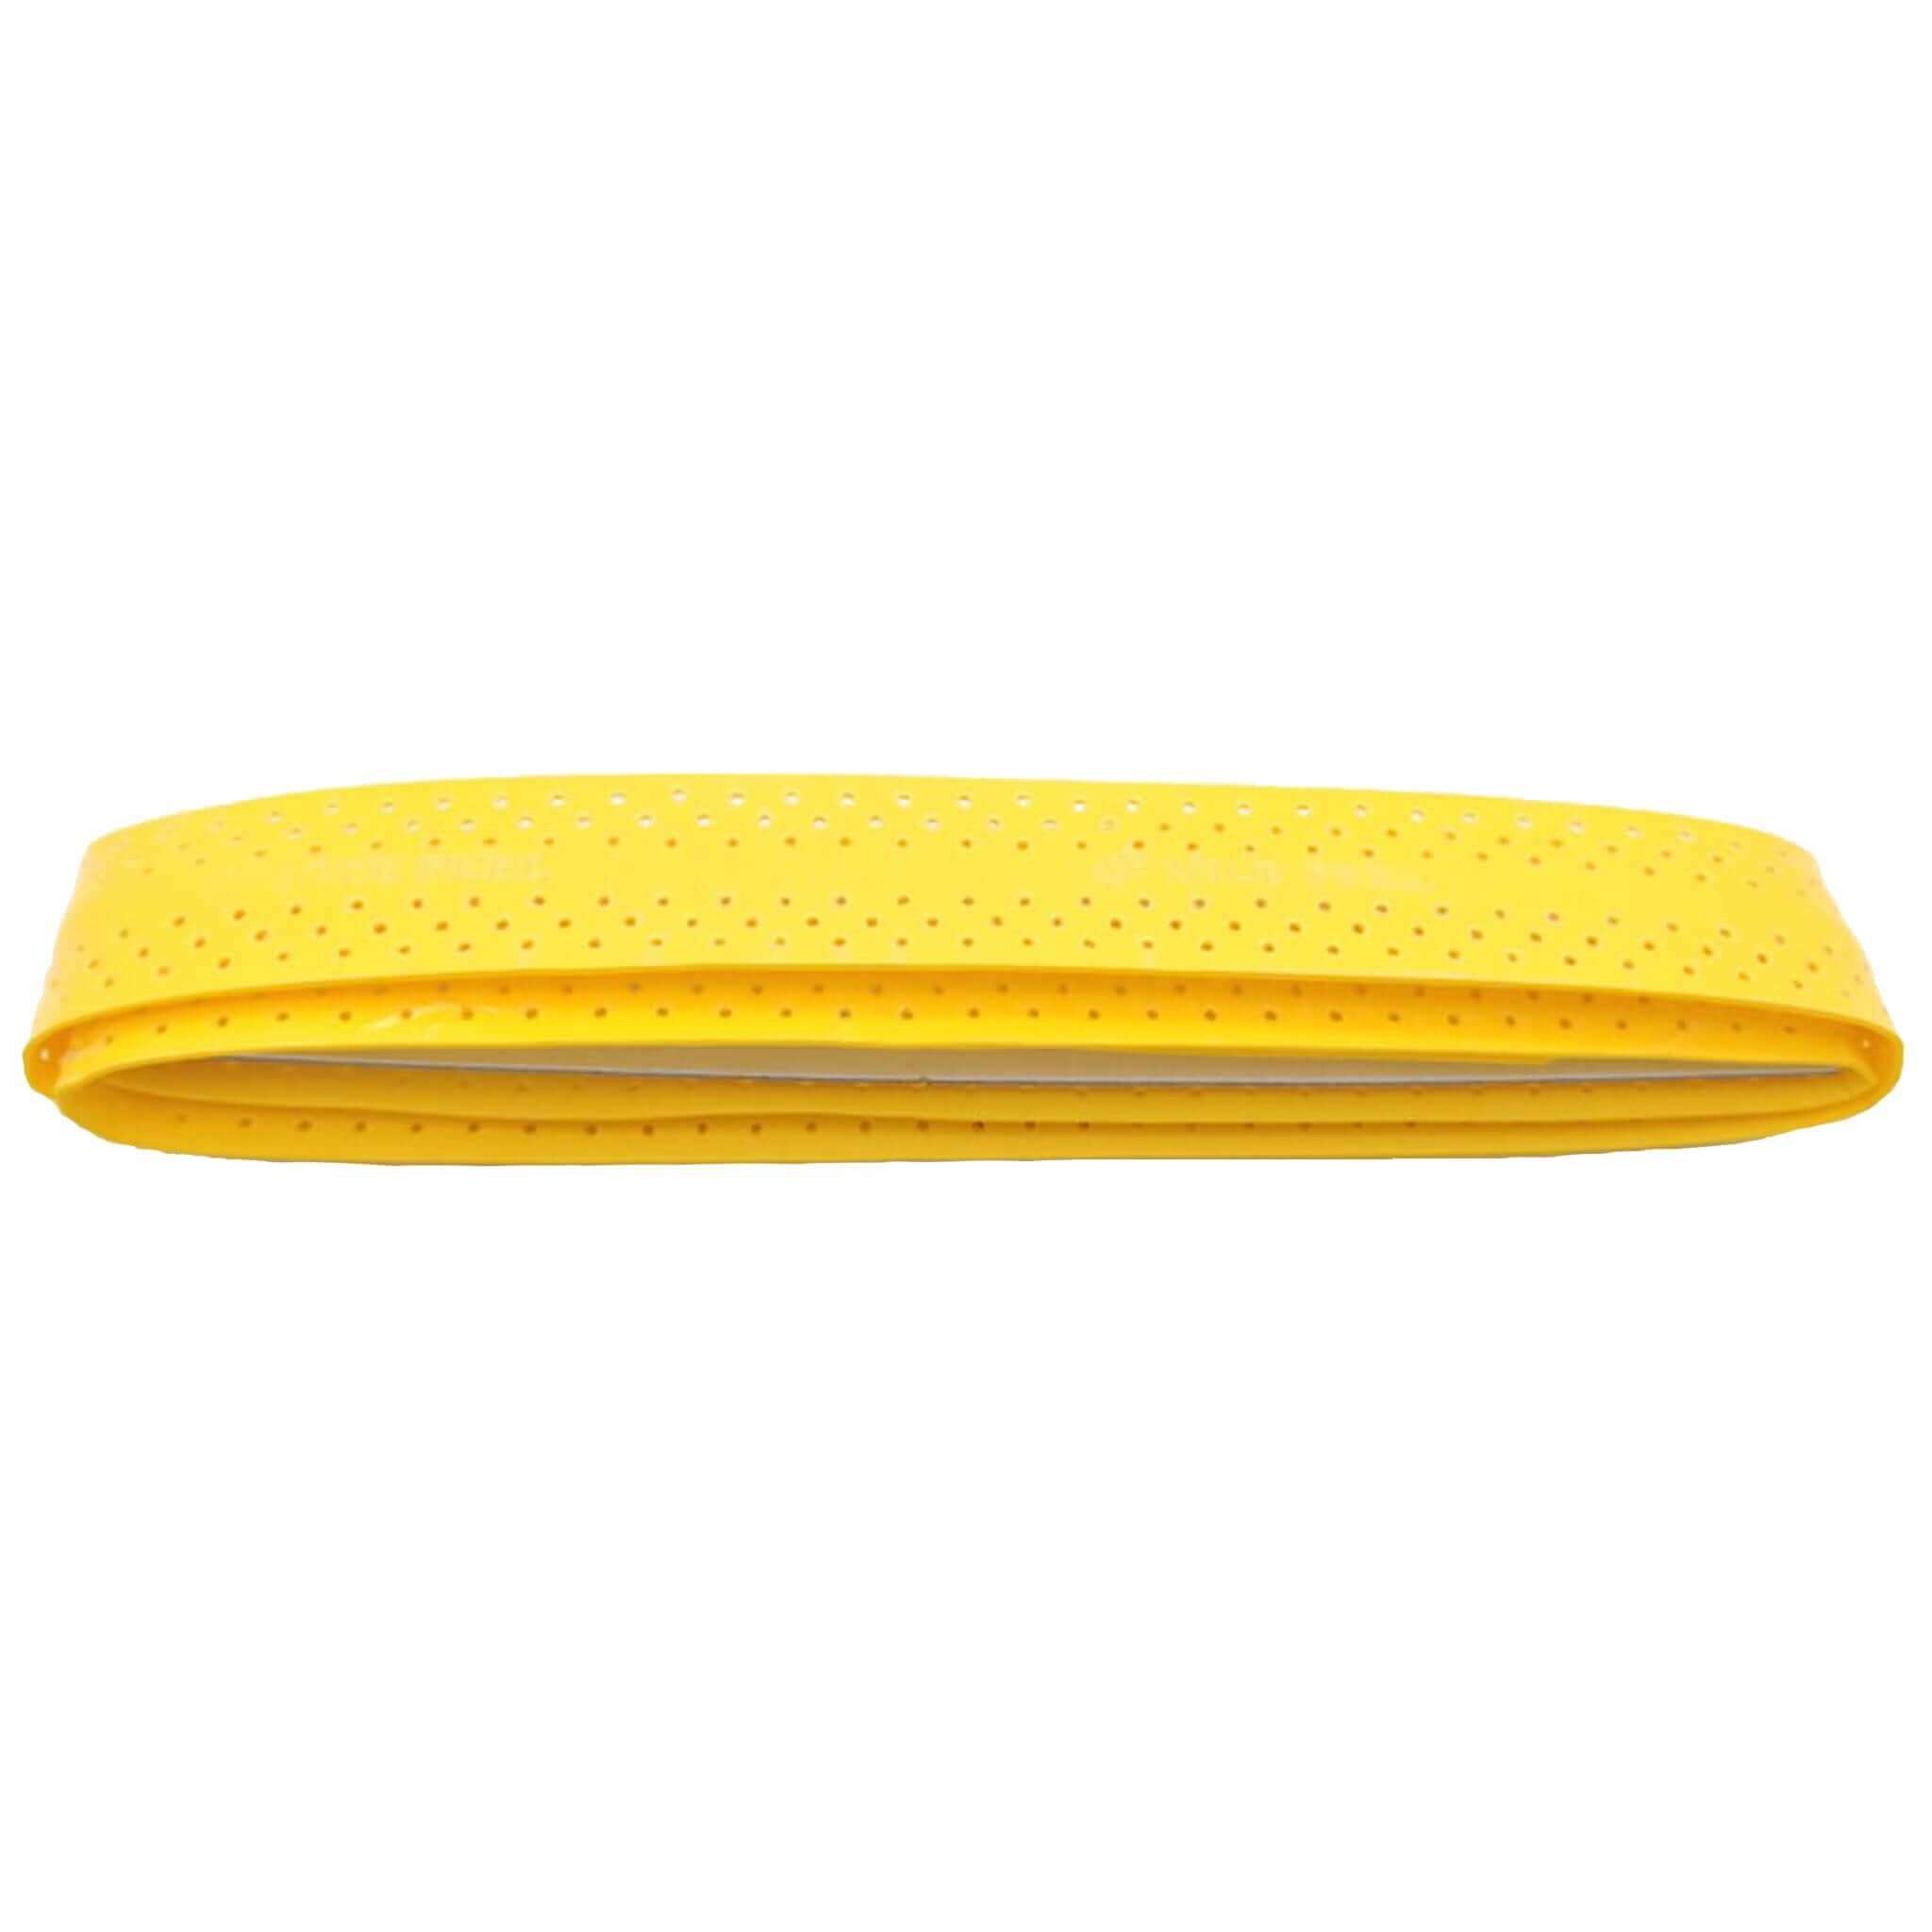 6 Pack Badminton 805 Overgrips | INSOURCE